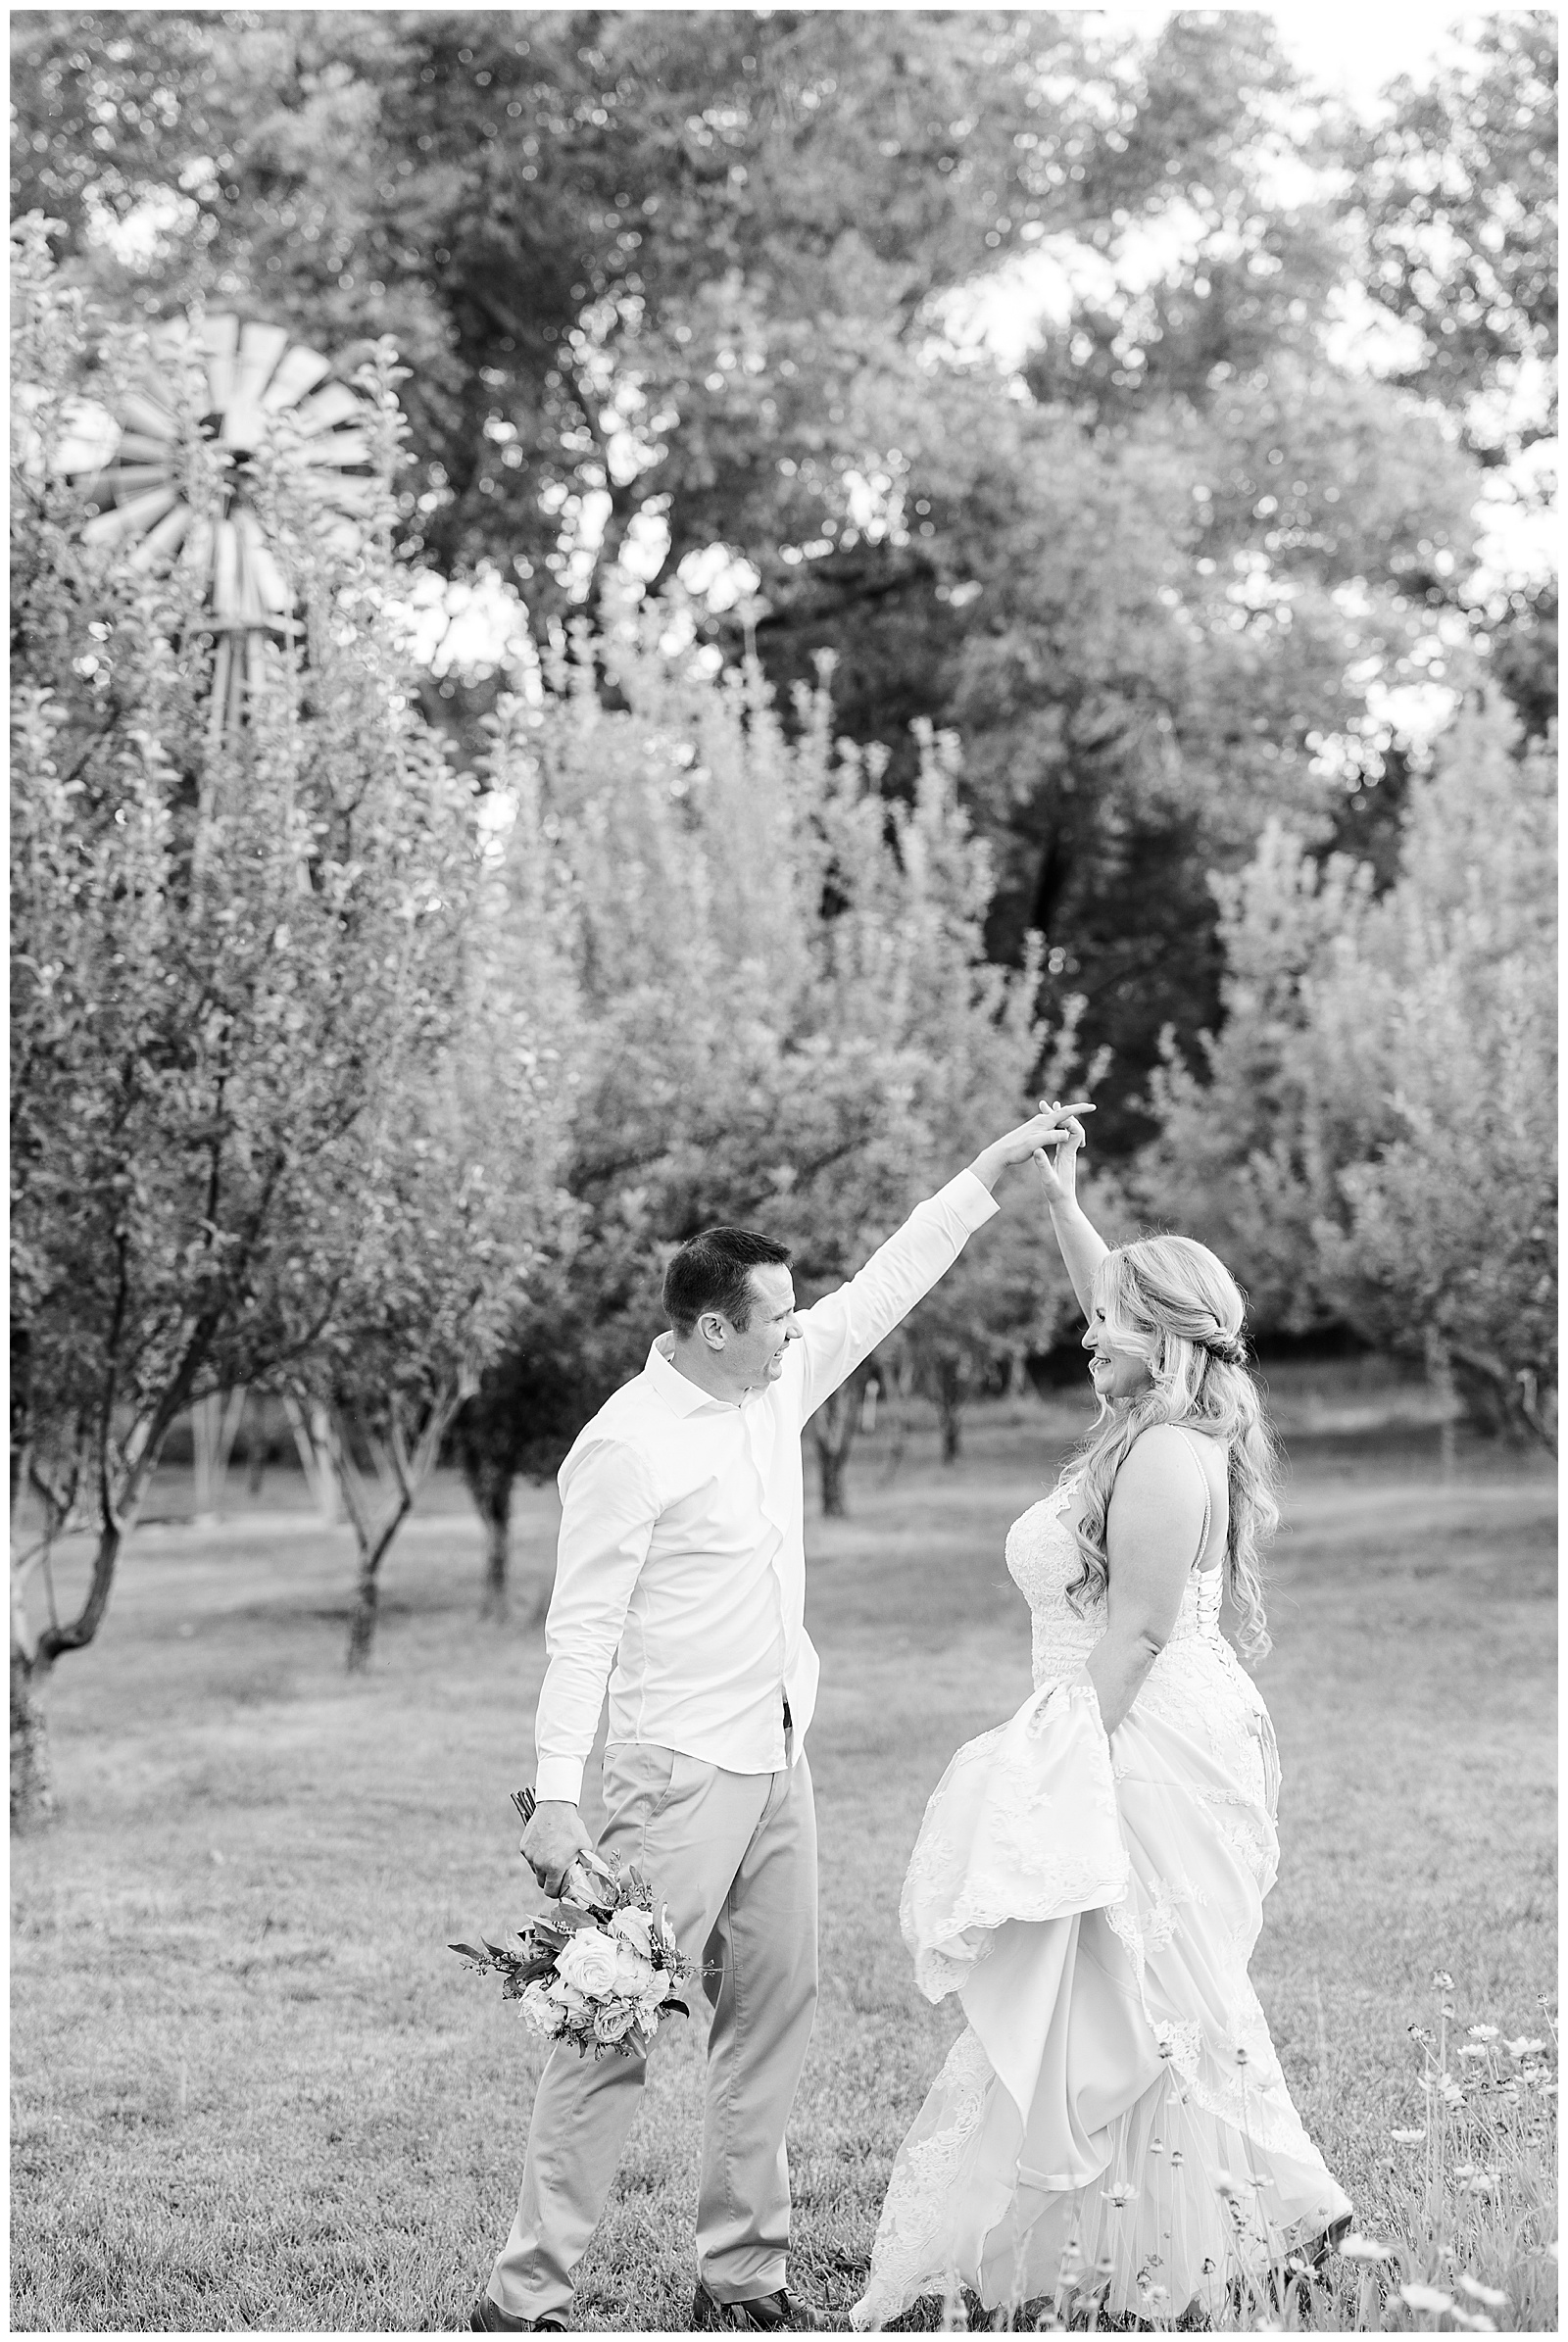 Bride and groom dancing in an apple orchard